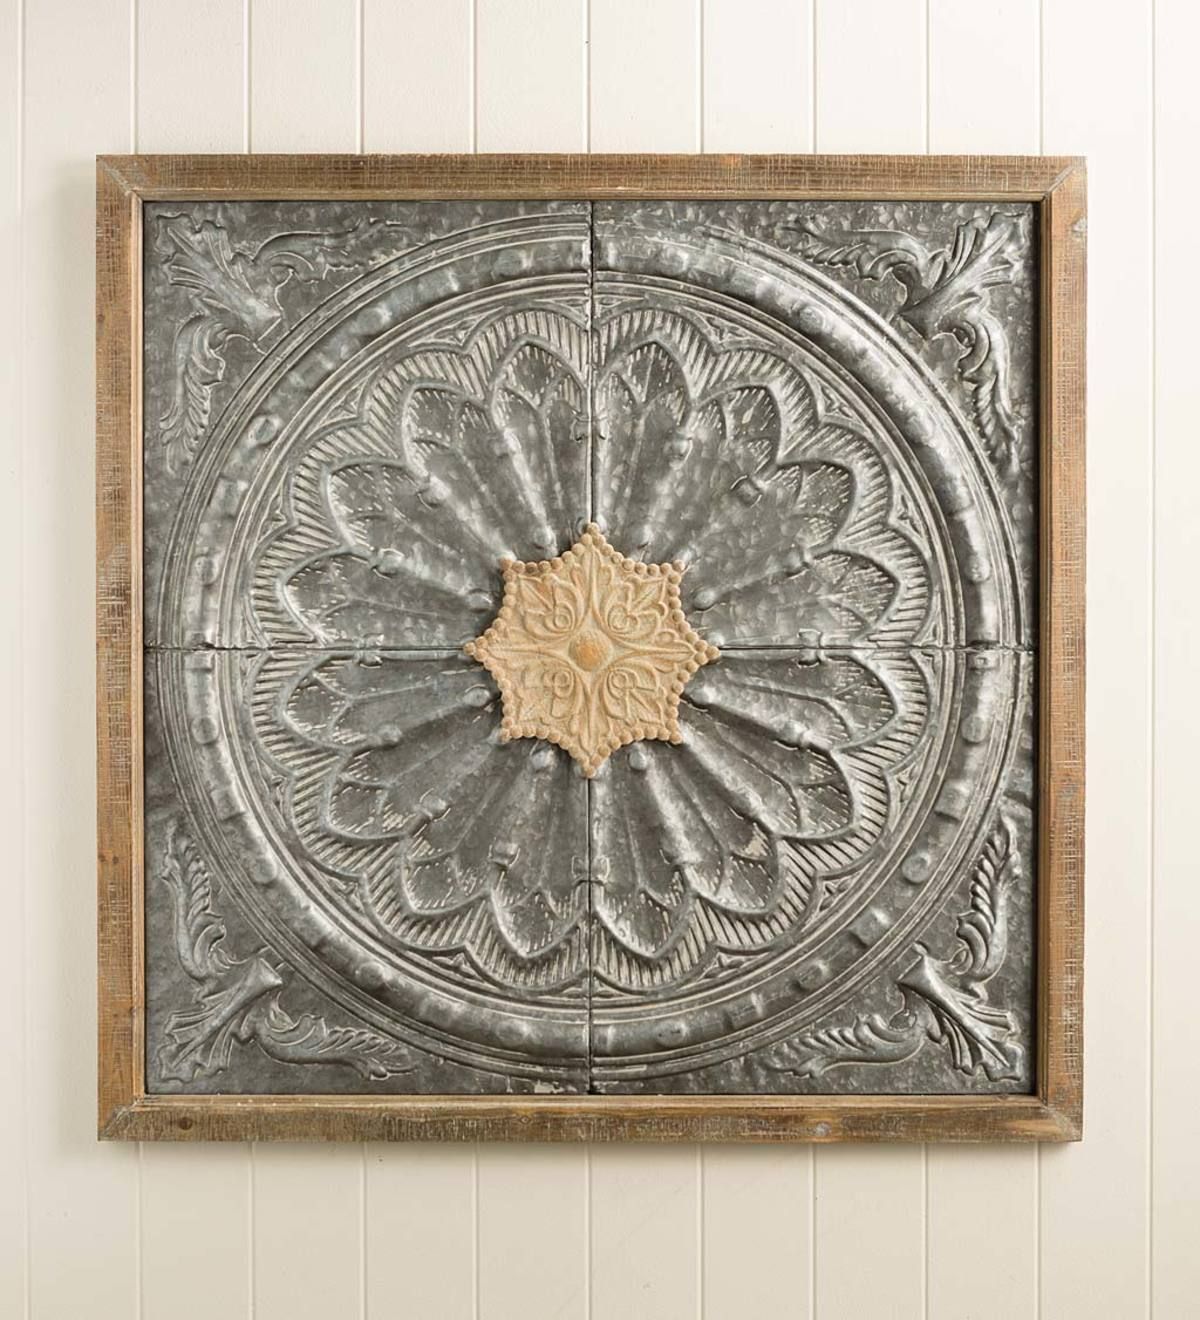 Antiqued Metal Medallion Wall Art Is A Statement Piece For Your Home Inside Square Metal Wall Art (View 11 of 15)